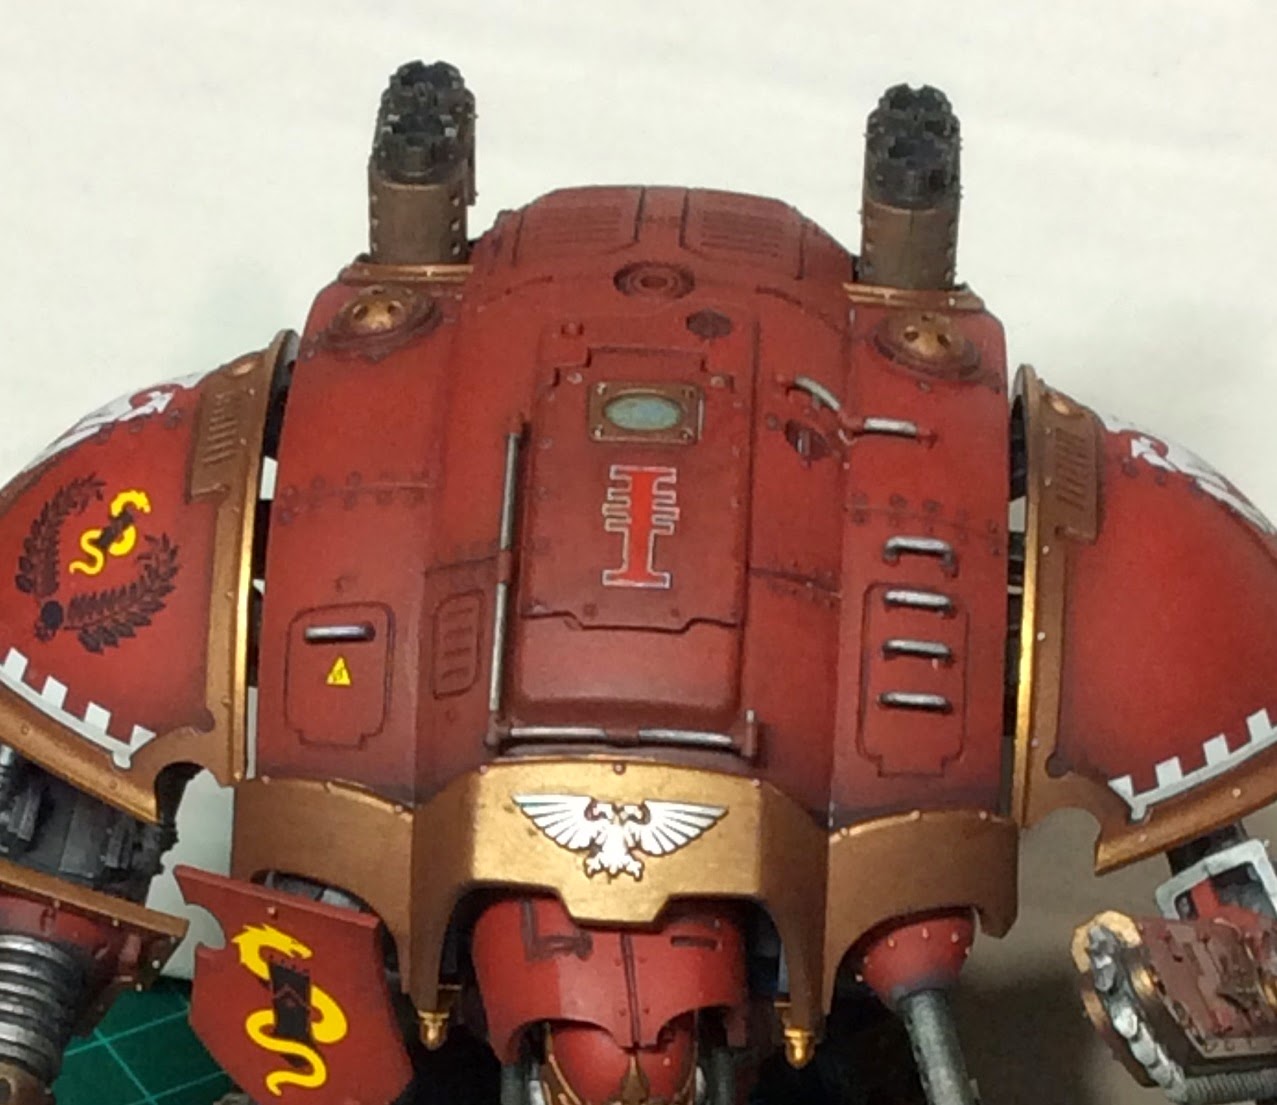 Freeblade Imperial Knight Errant Top Carapace